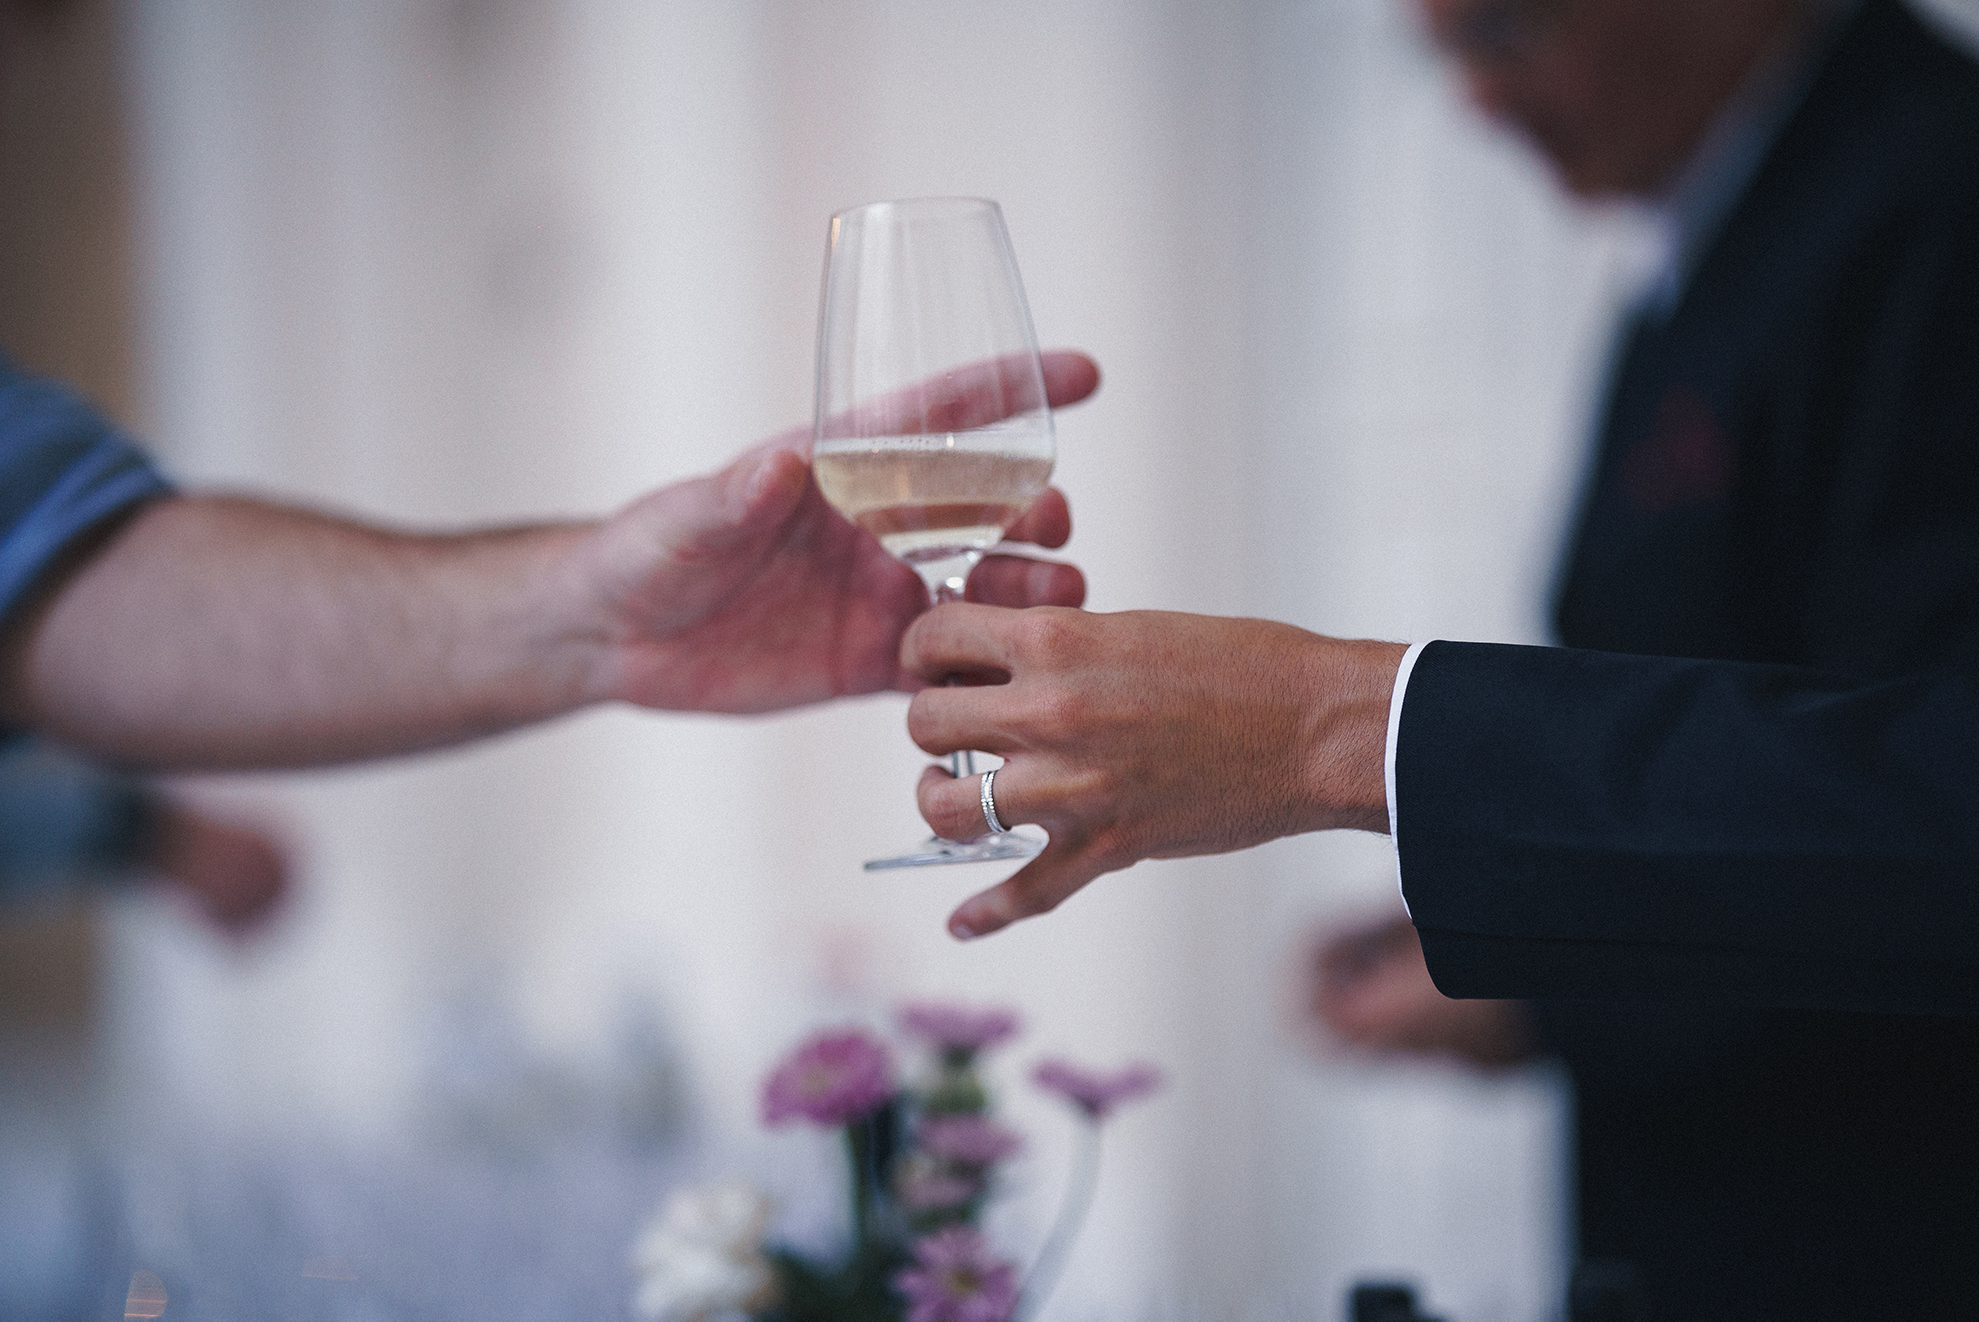 A person gracefully holds a glass of wine, presenting it to another person with elegance and charm.